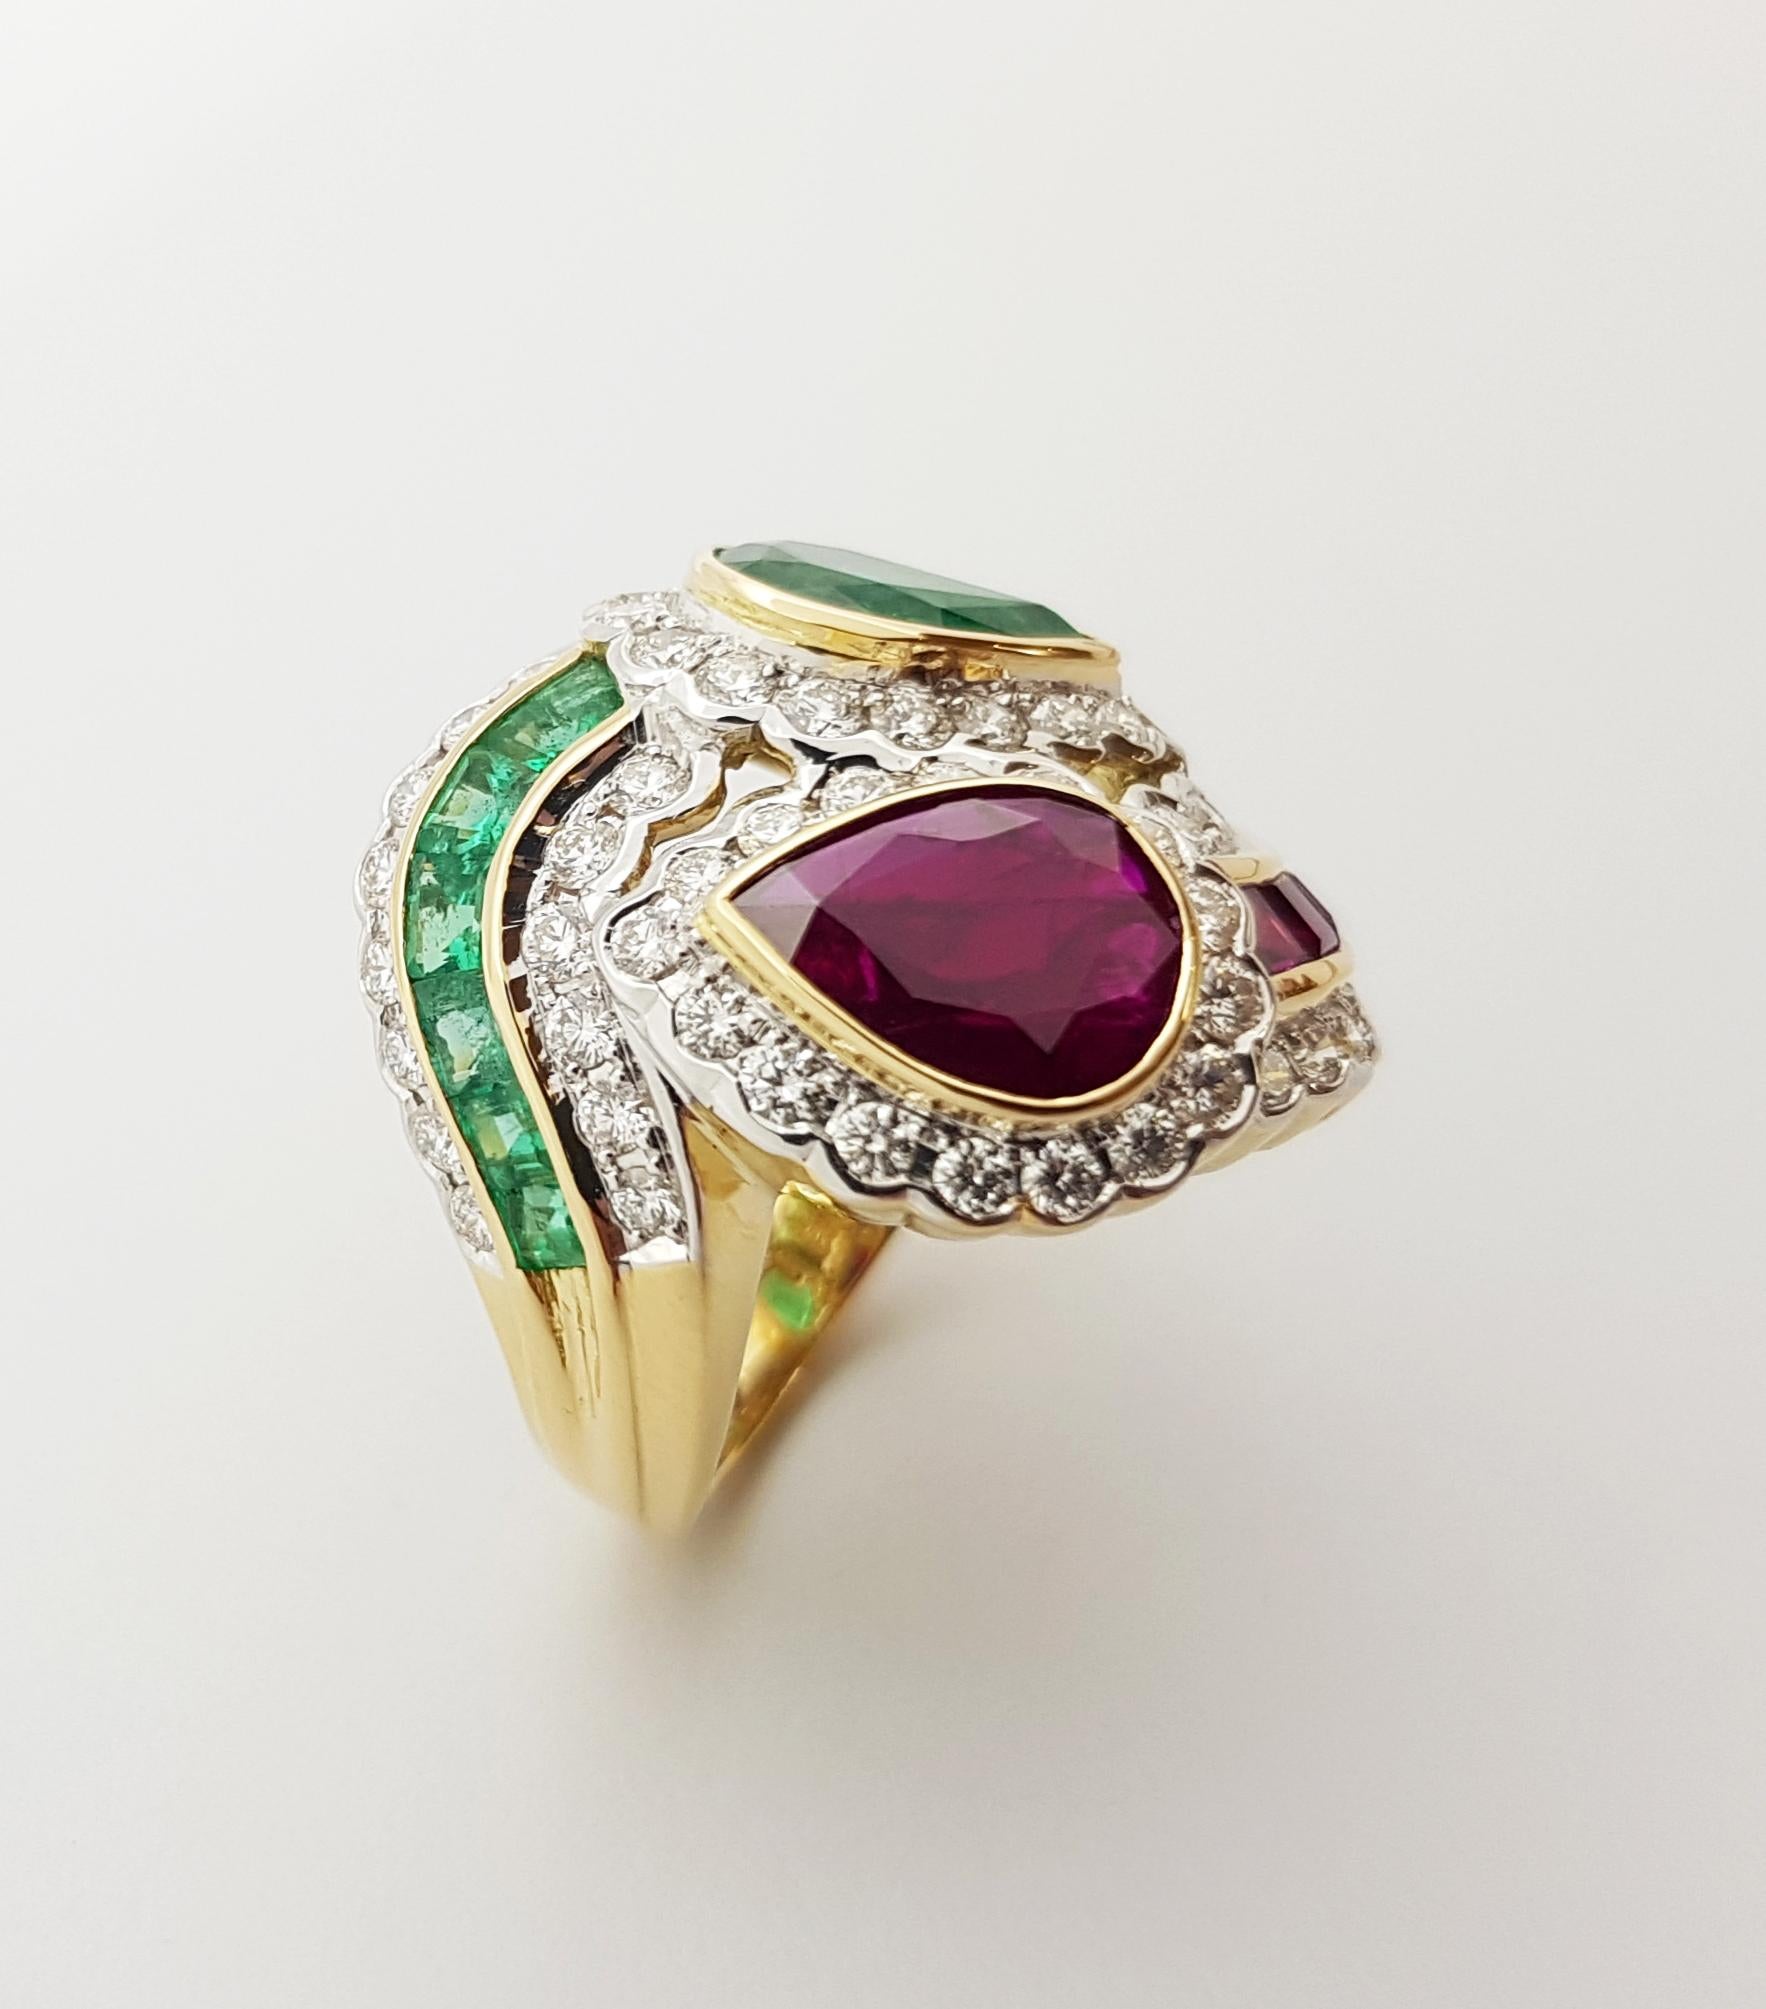 Ruby, Emerald with Diamond Ring Set in 18 Karat Gold Settings For Sale 2